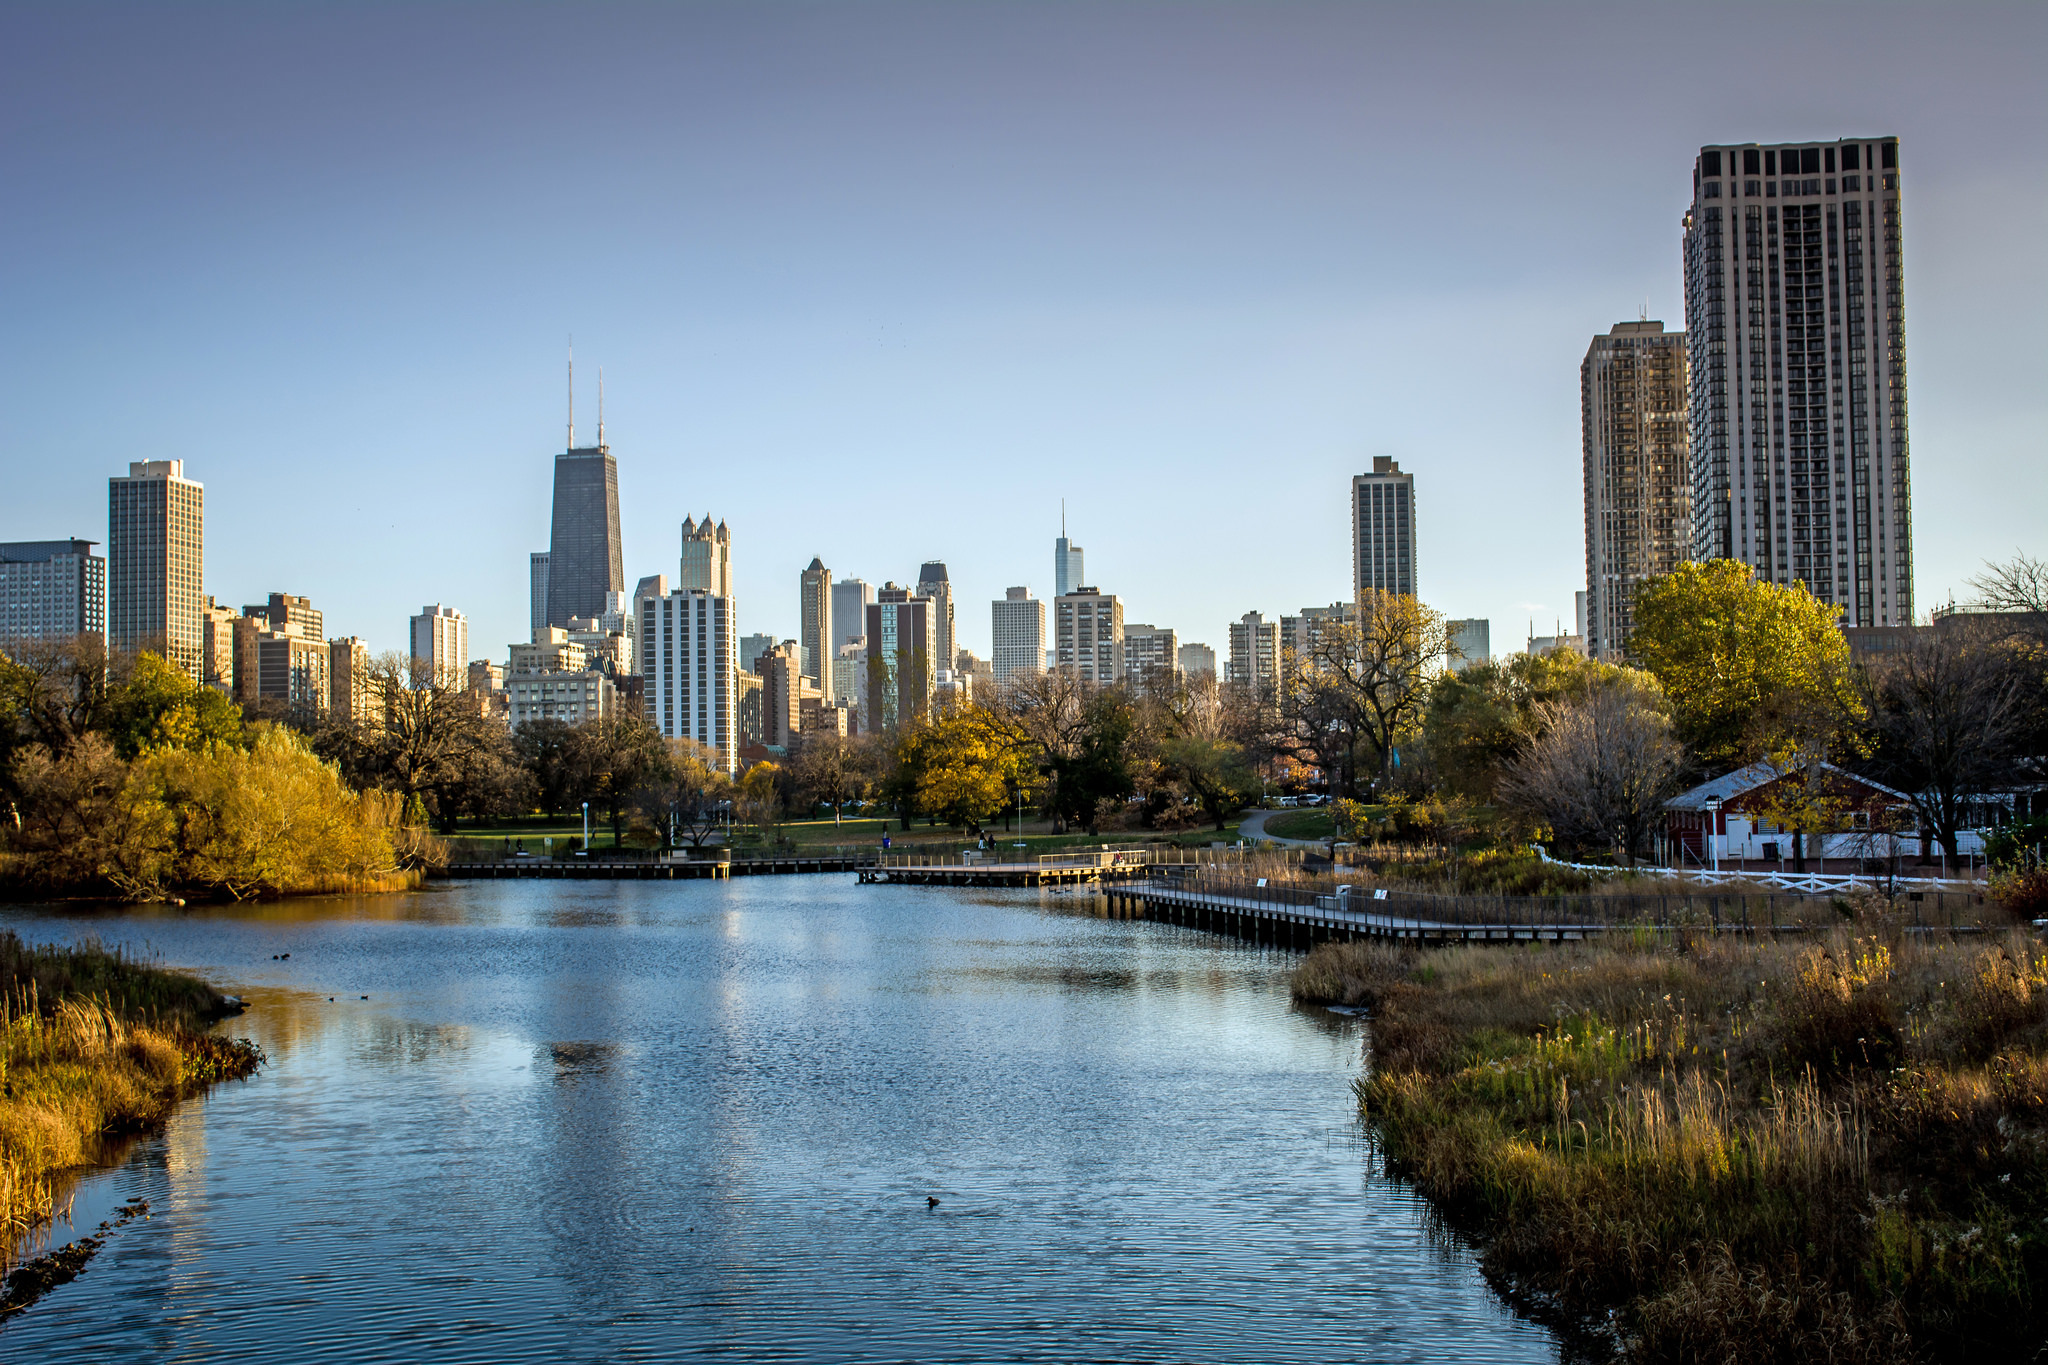 Take a Look at the 25 Best Chicago Attractions